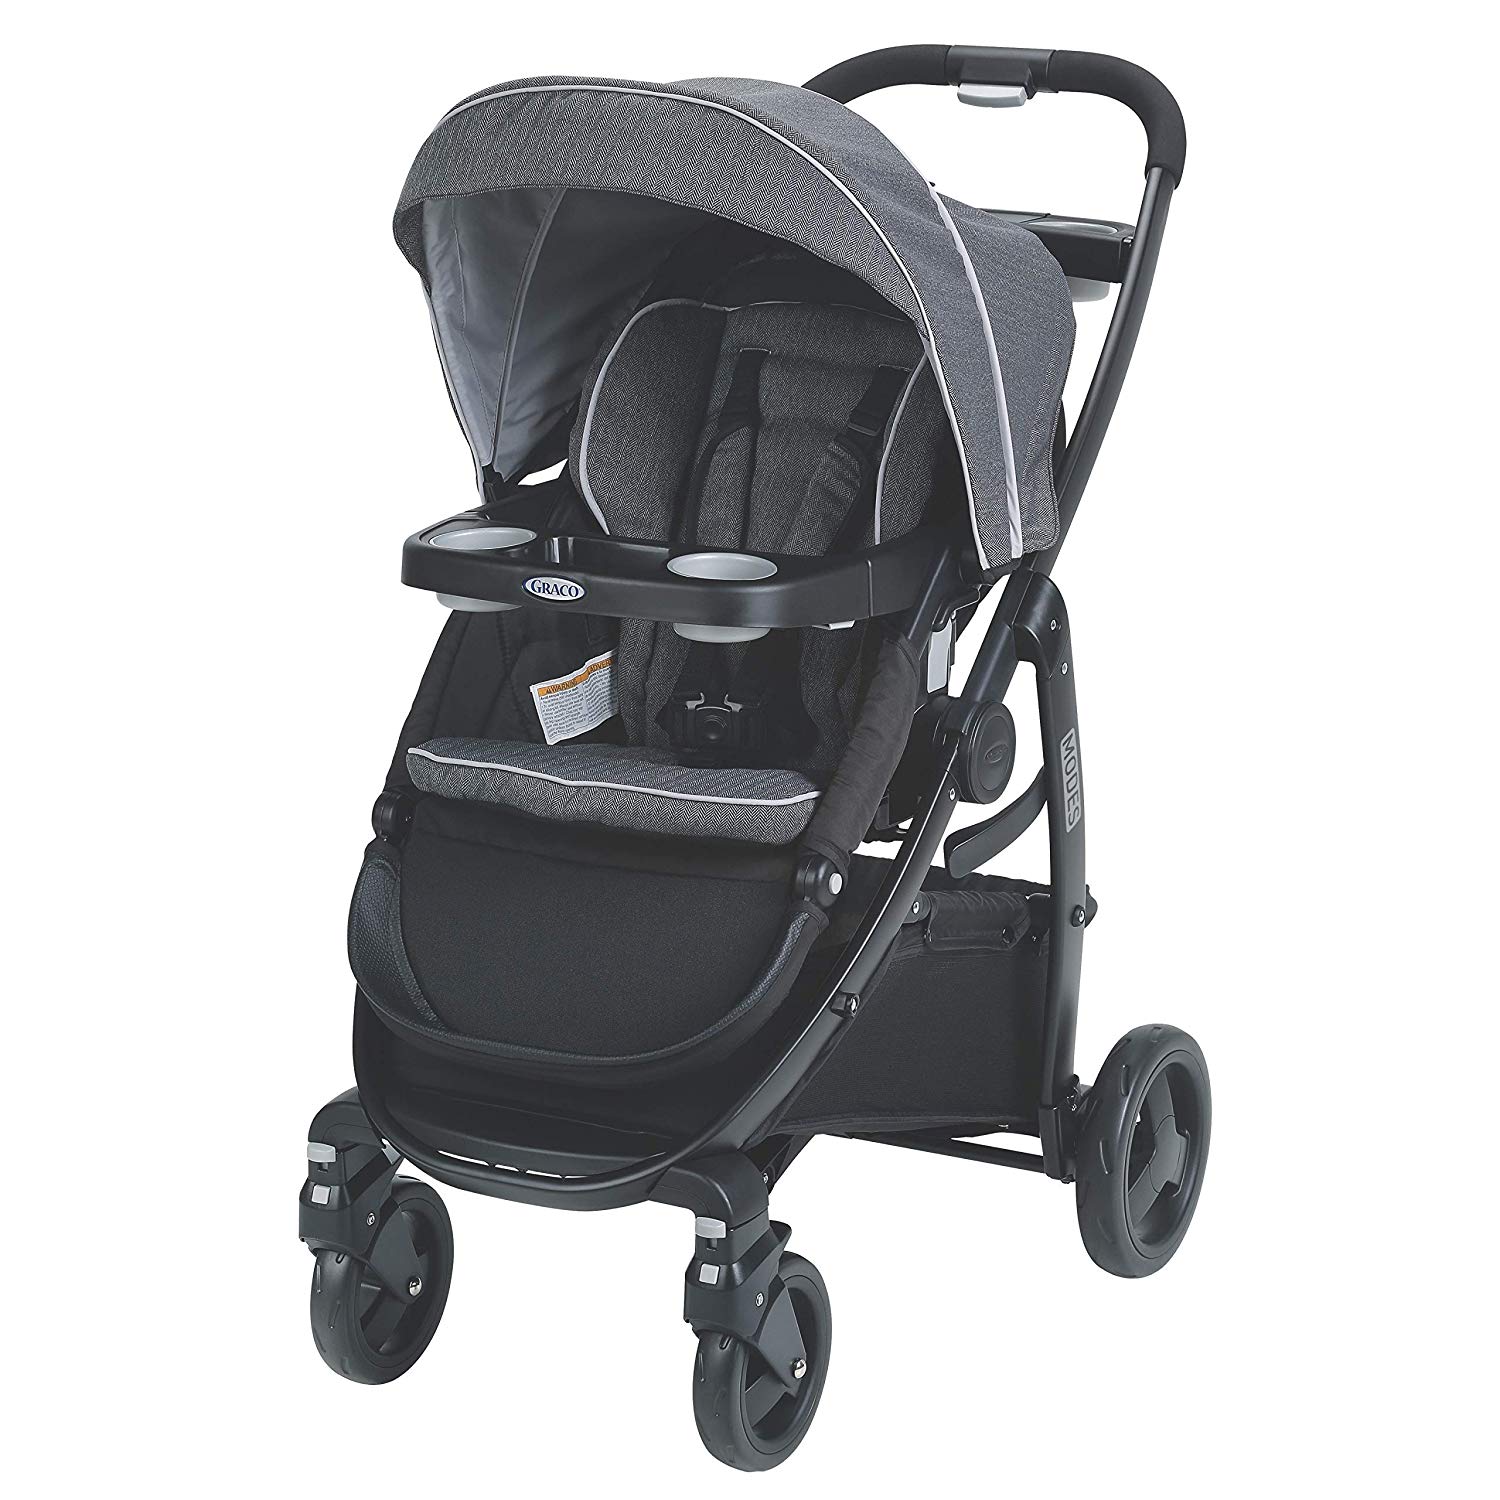 Review of Graco Modes Click Connect Stroller, Grayson